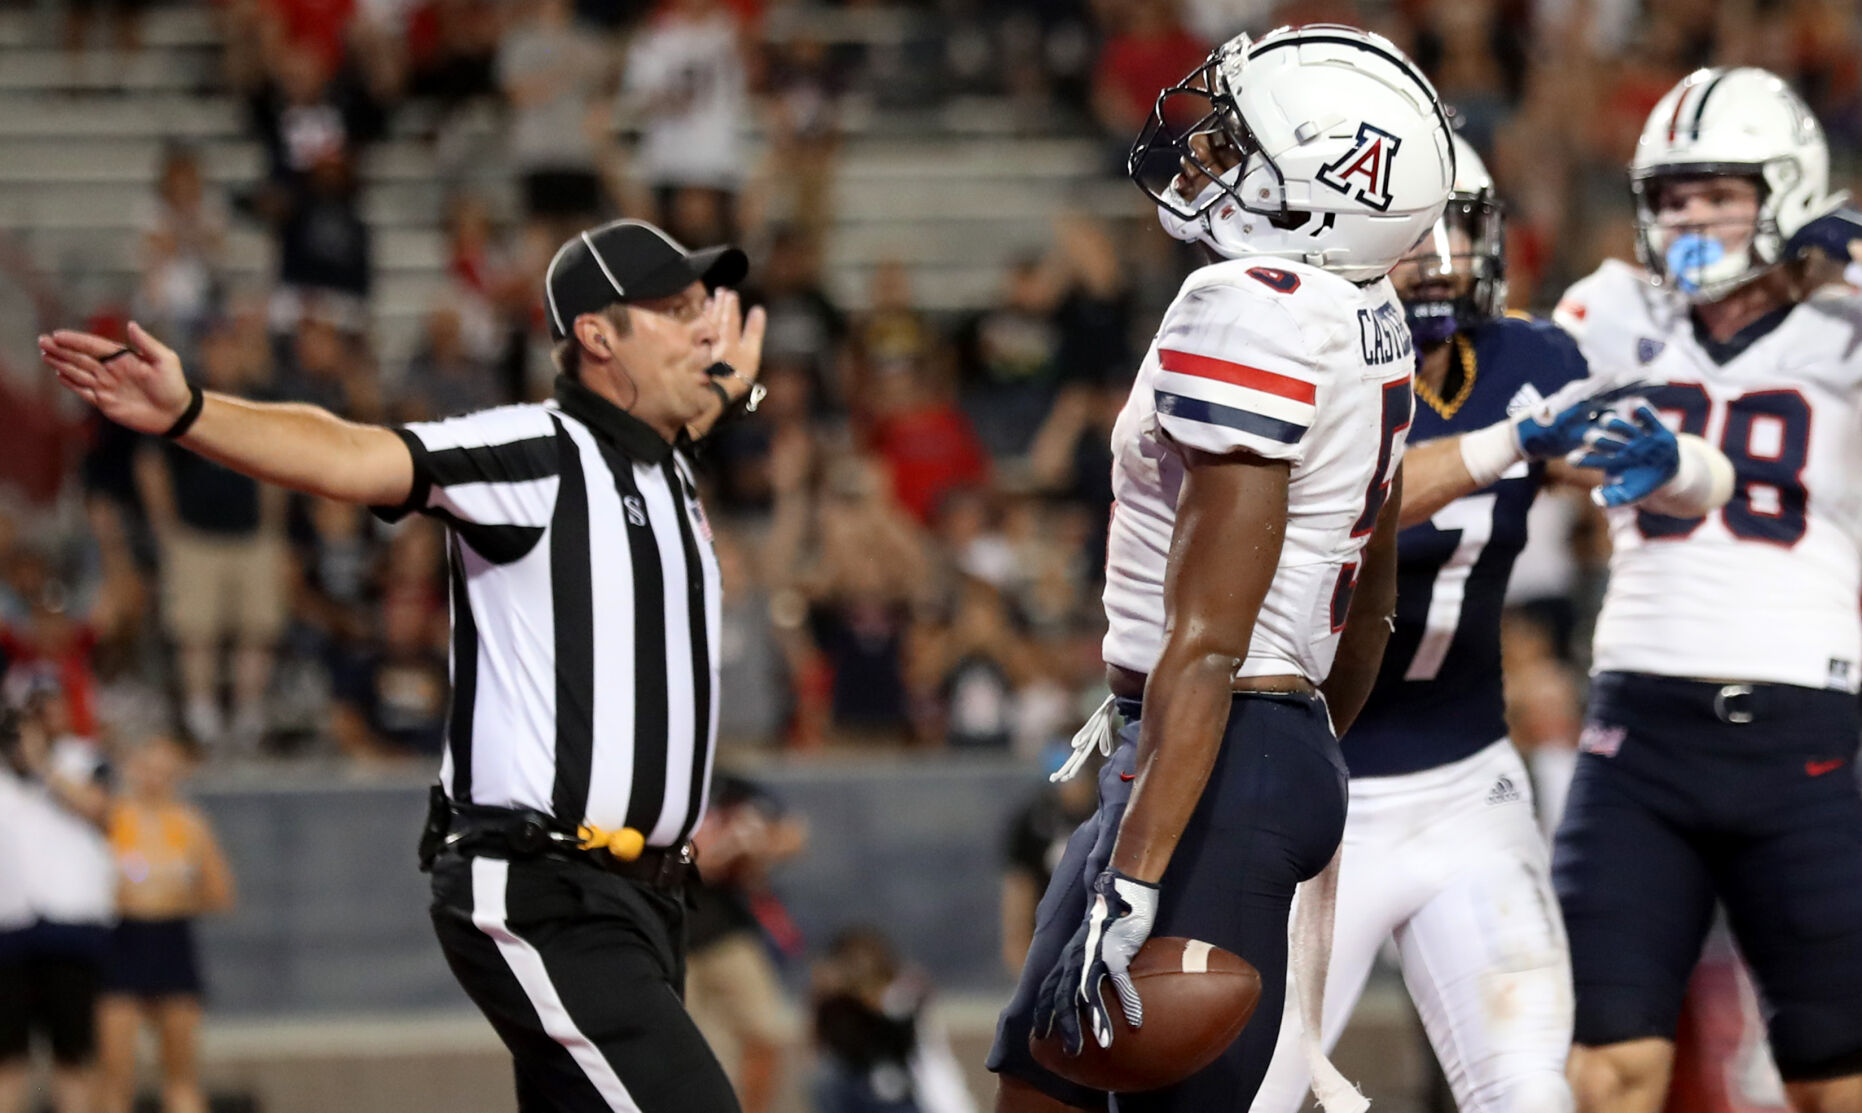 Its embarrassing Arizona experiences a new low as loss to NAU extends skid to 15 games